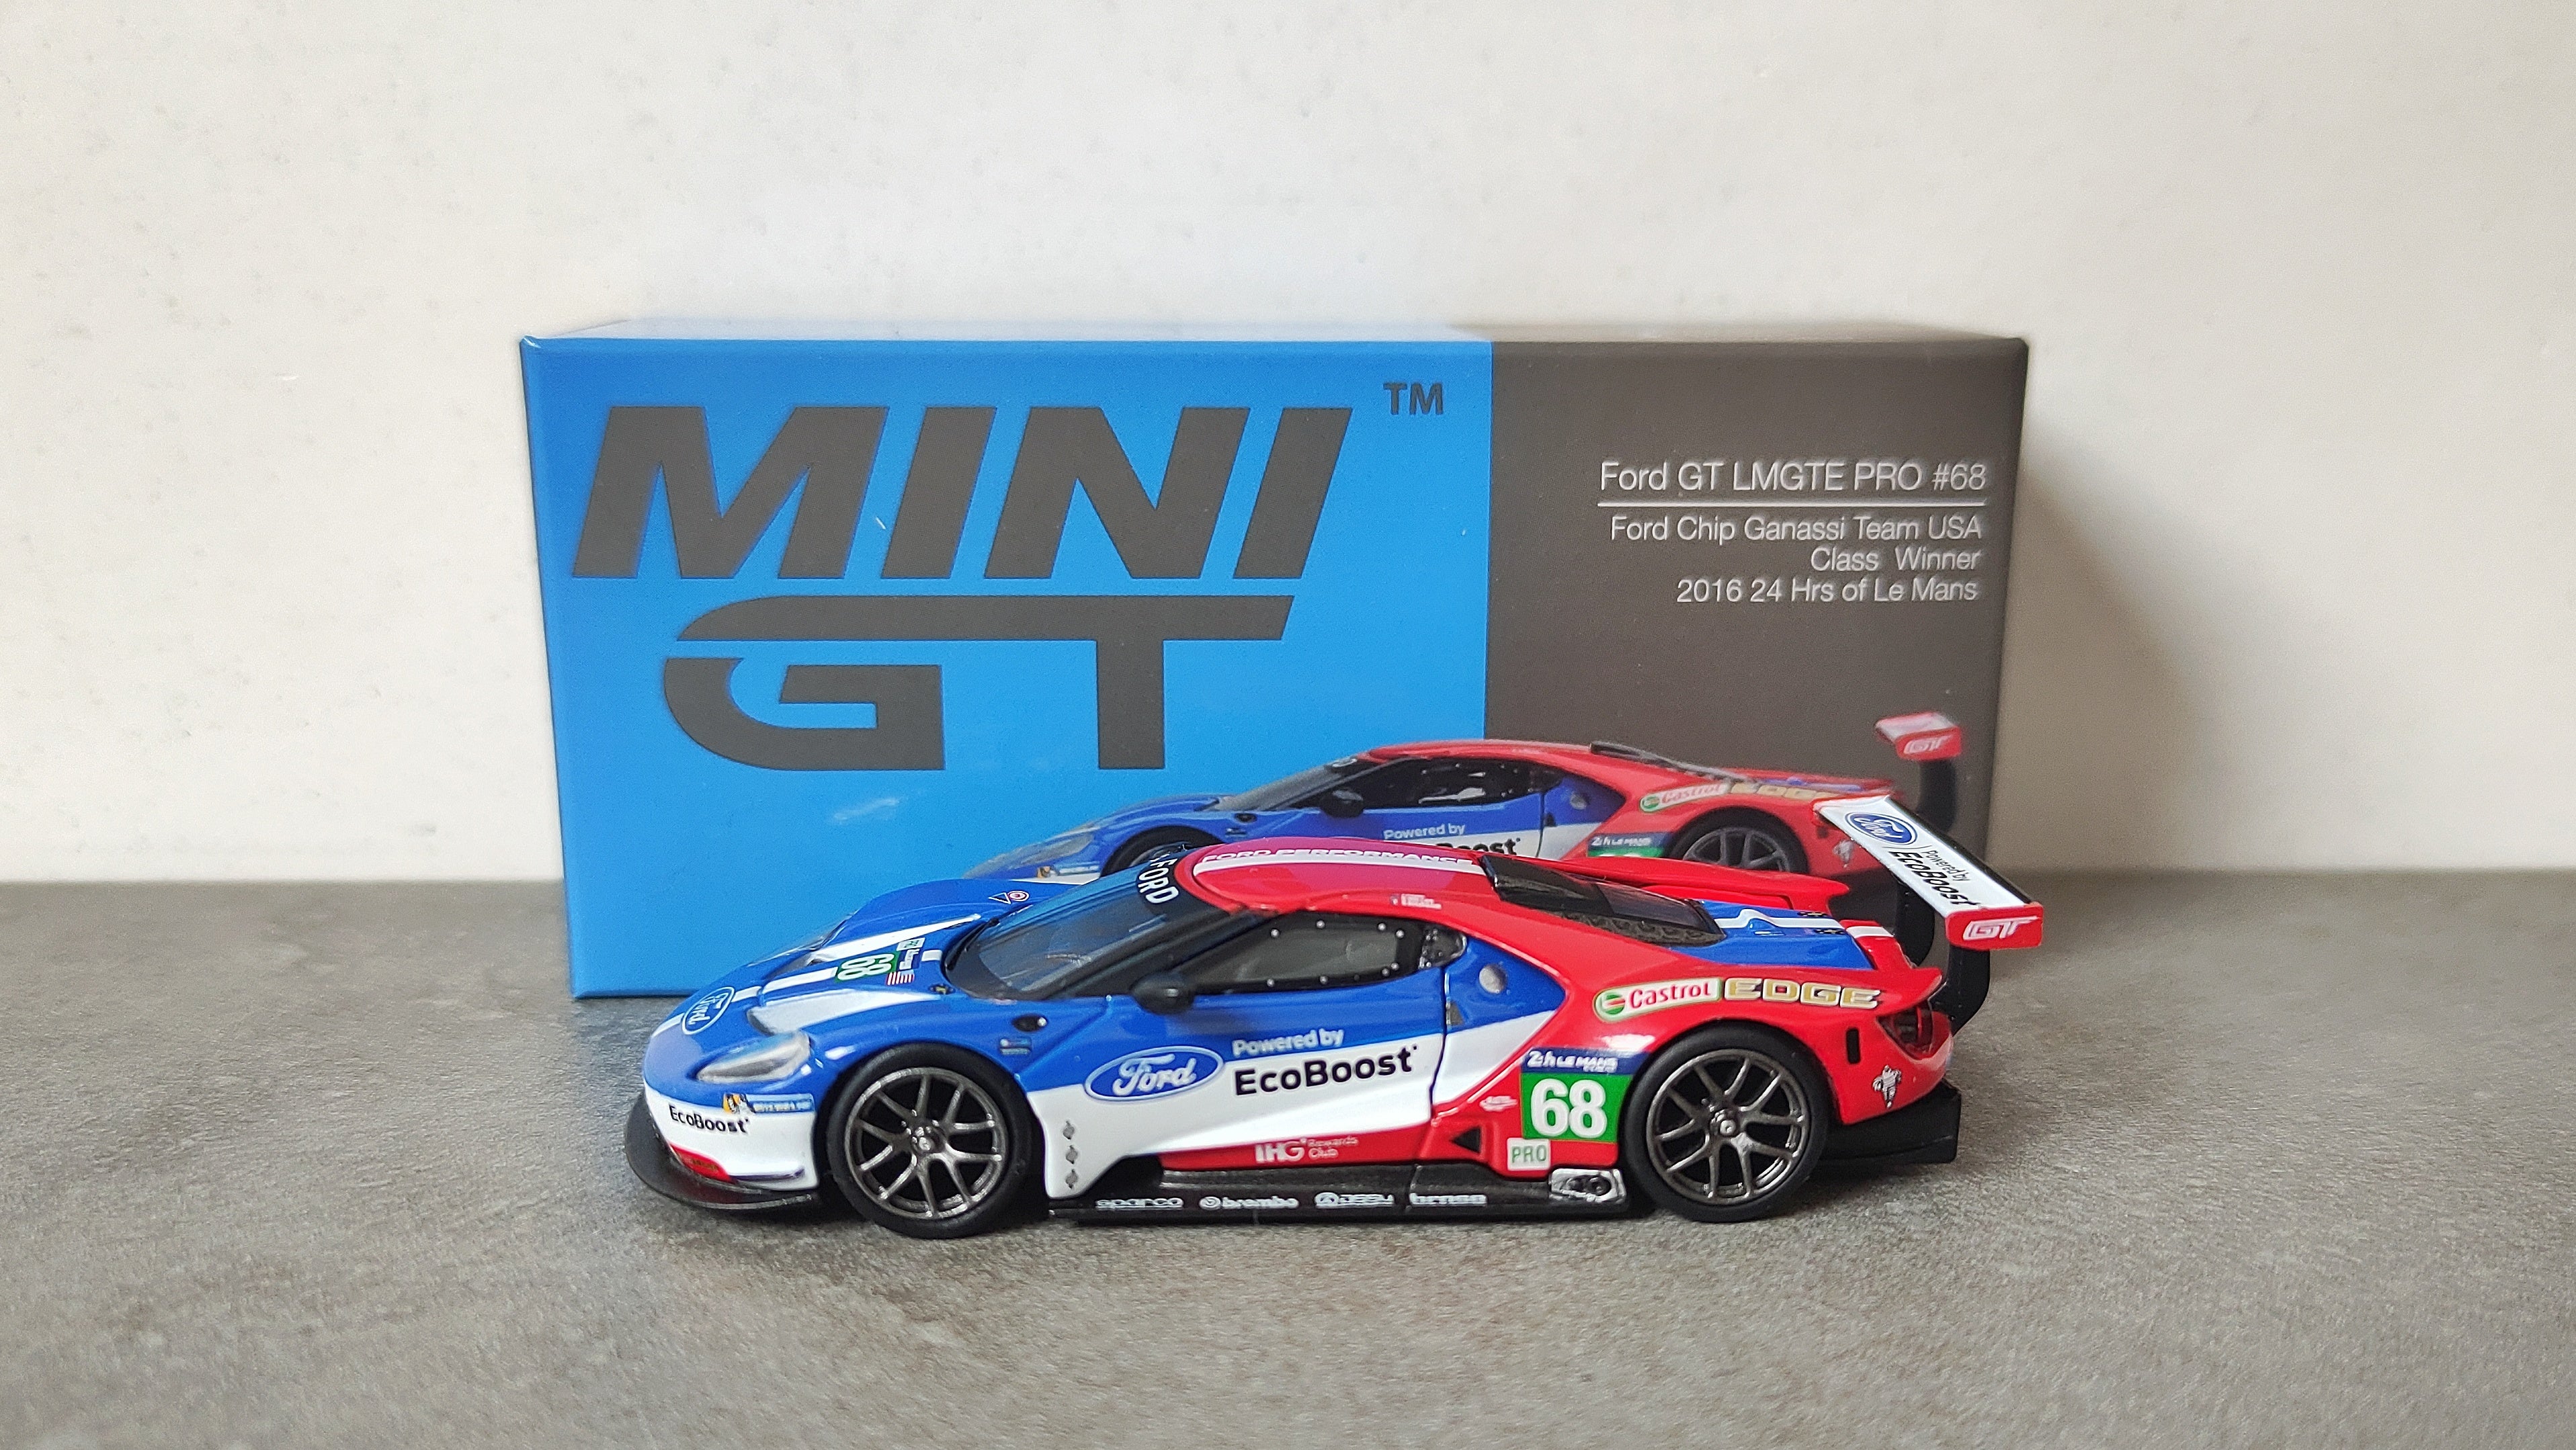 Mini GT TSM Ford GT LMGTE Pro #68 Ford Chip Ganassi Team USA Le